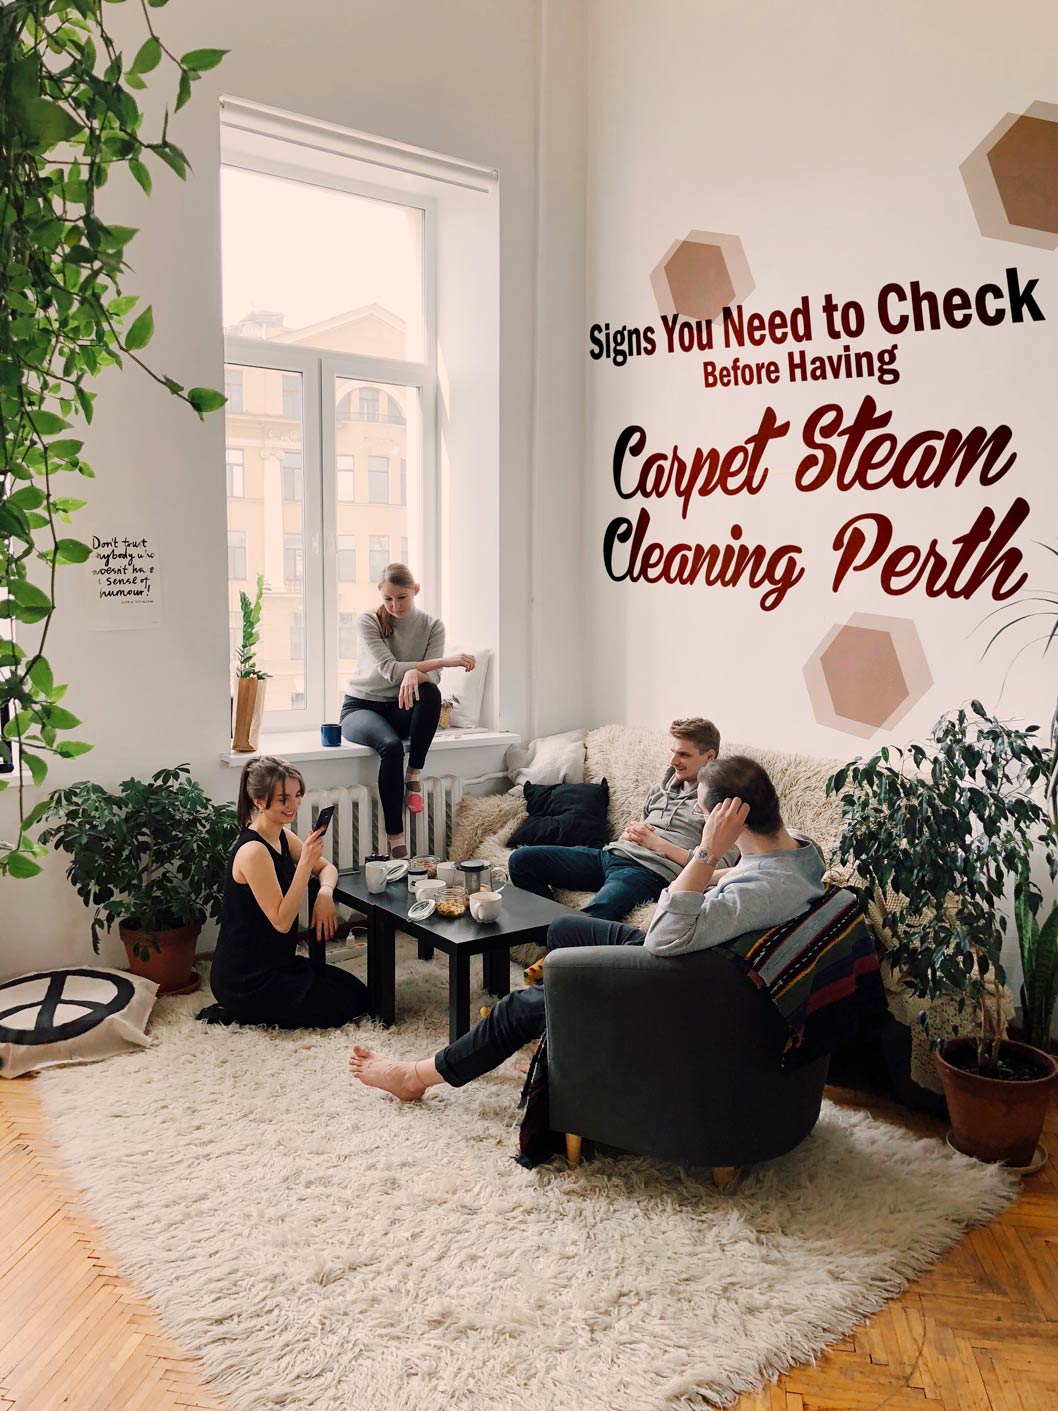 The Best Time To Have Carpet Steam Cleaning Perth